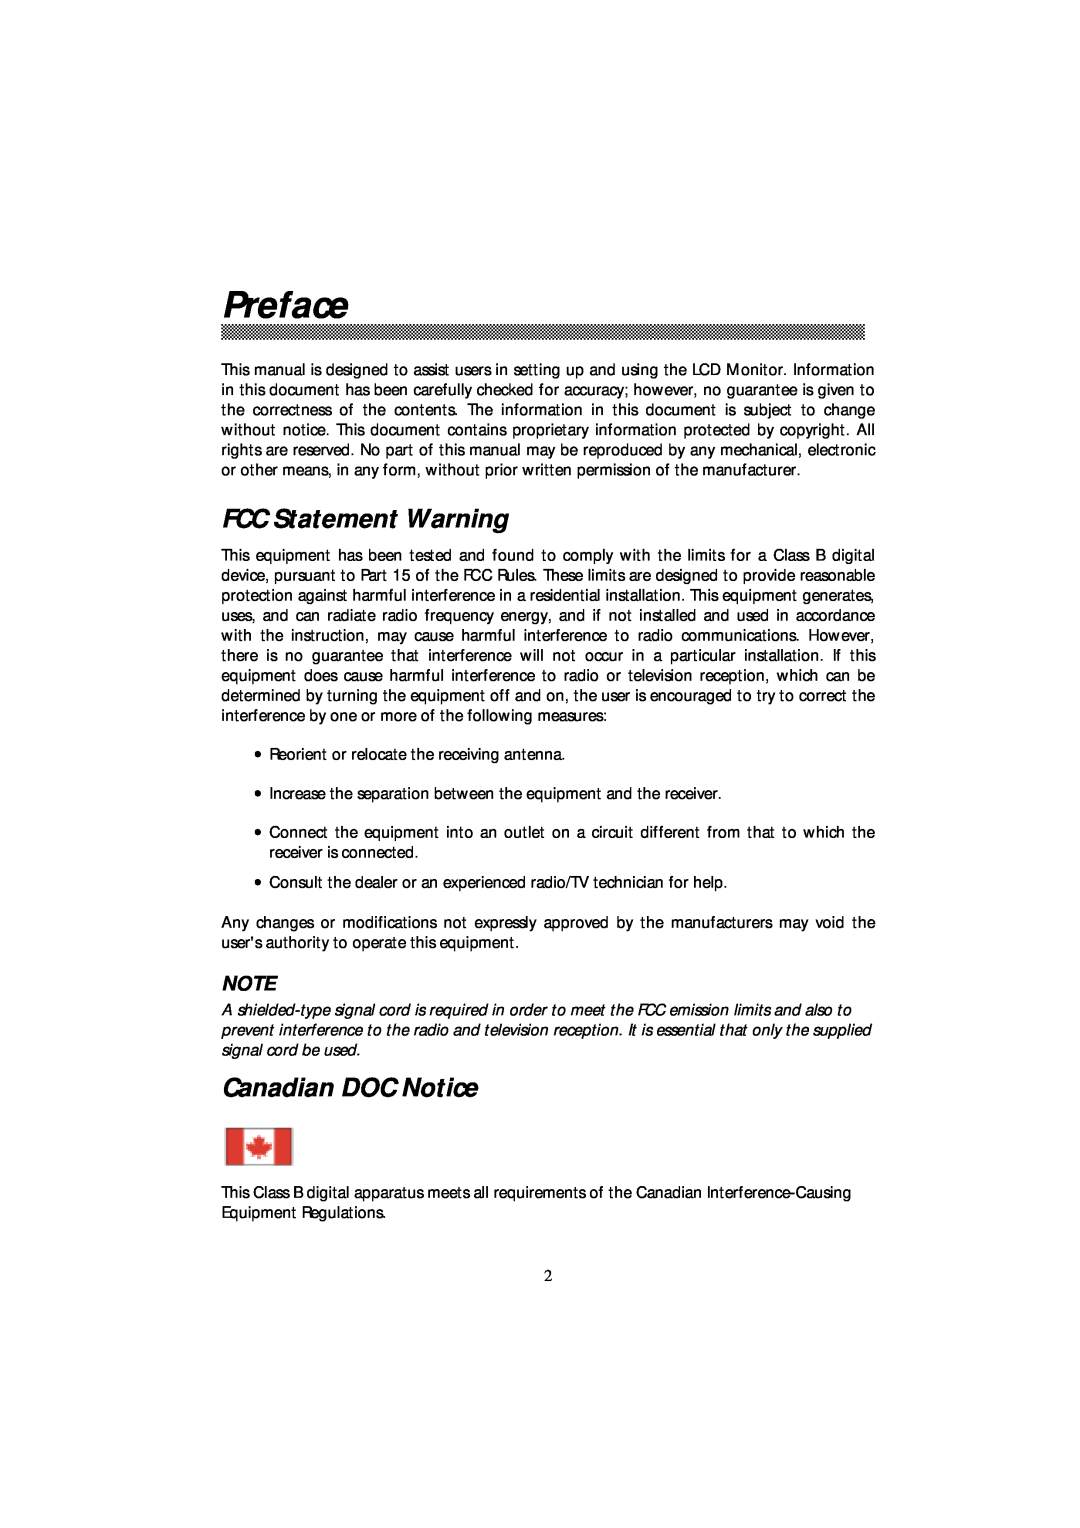 Acer 501 manual Preface, FCC Statement Warning, Canadian DOC Notice 